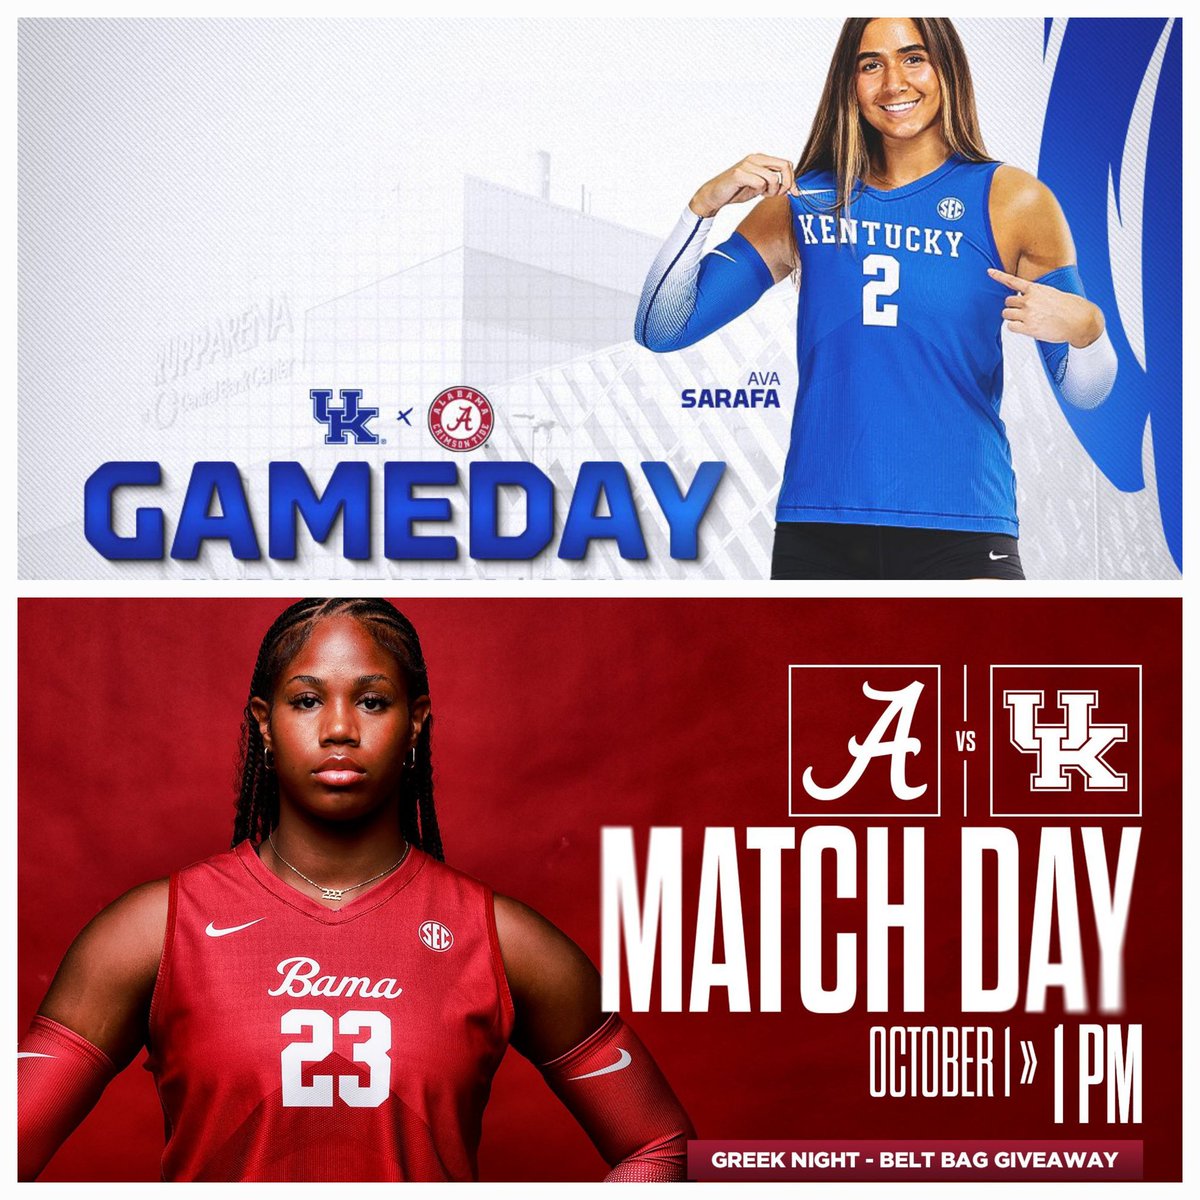 Headed to Tuscaloosa to watch these two great teams compete❗️
@KentuckyVB at @AlabamaVBall